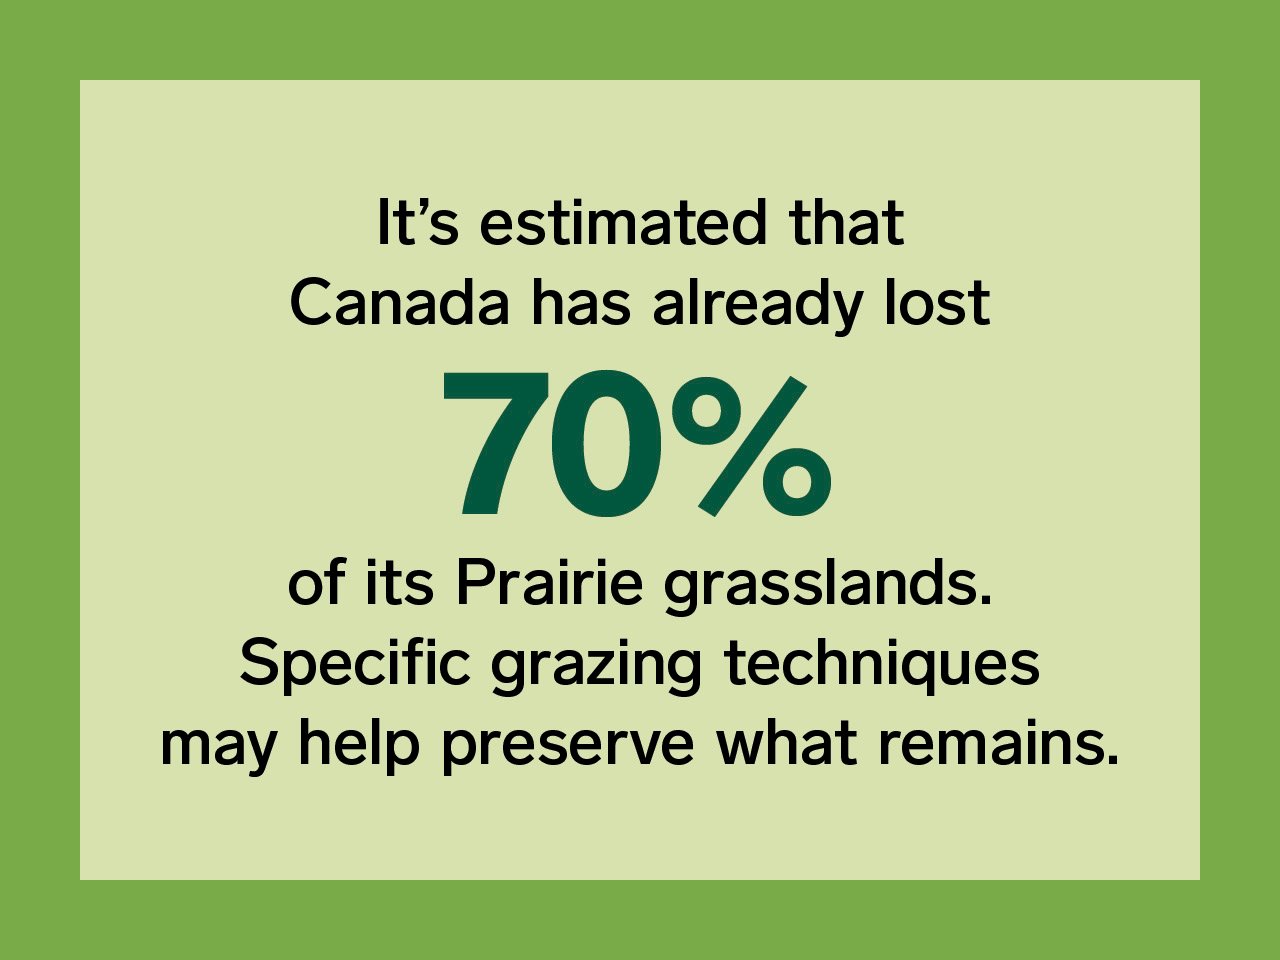 Green graphic with text explaining that Canada has lost 70% of its Prairie grasslands.